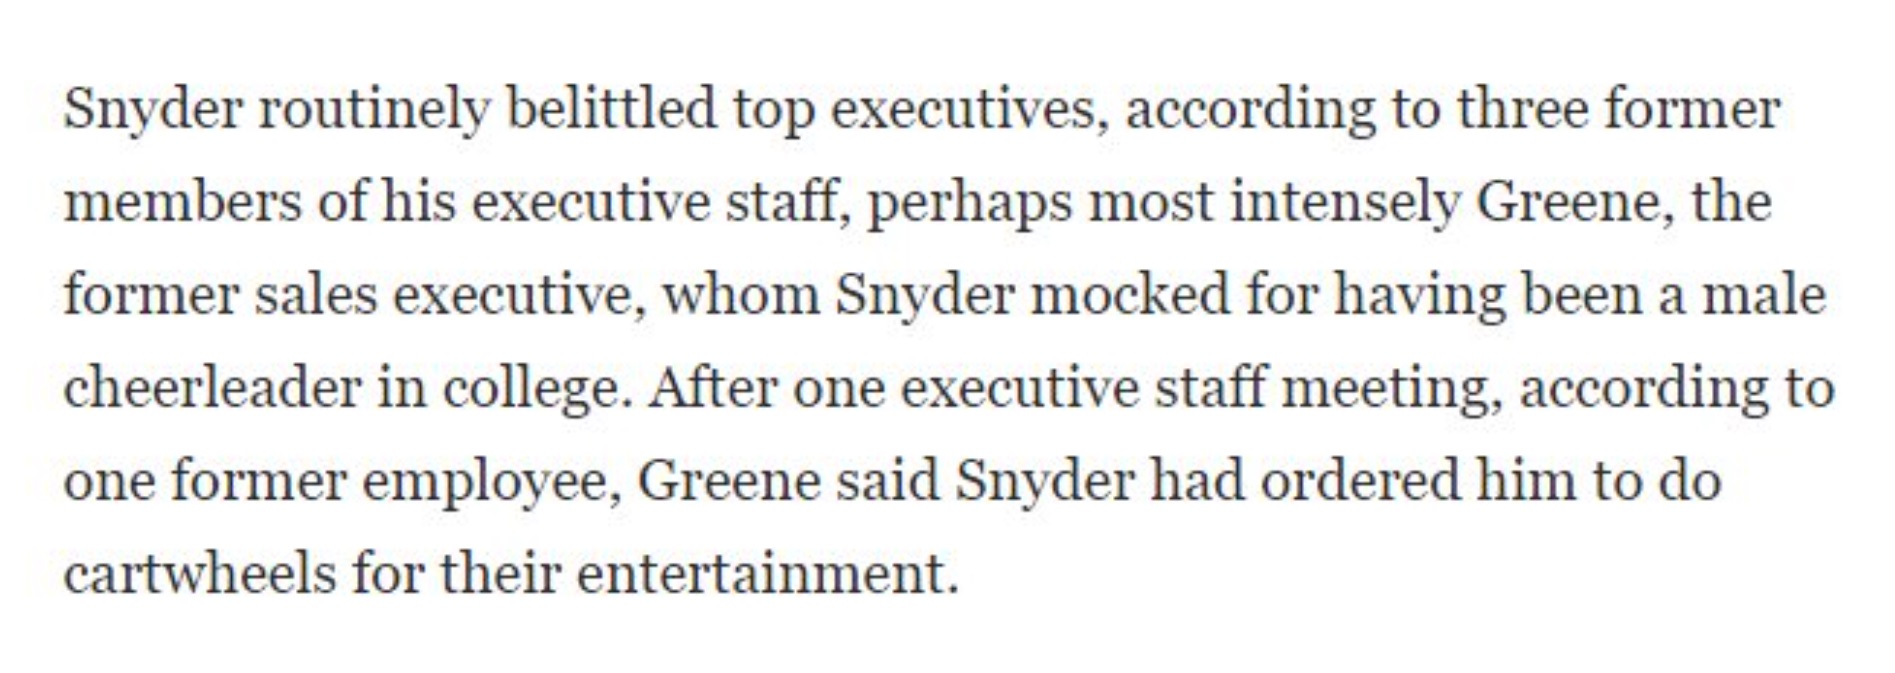 PHOTO Daniel Snyder Mocked One Of His Executives For Being A Male Cheerleader In College